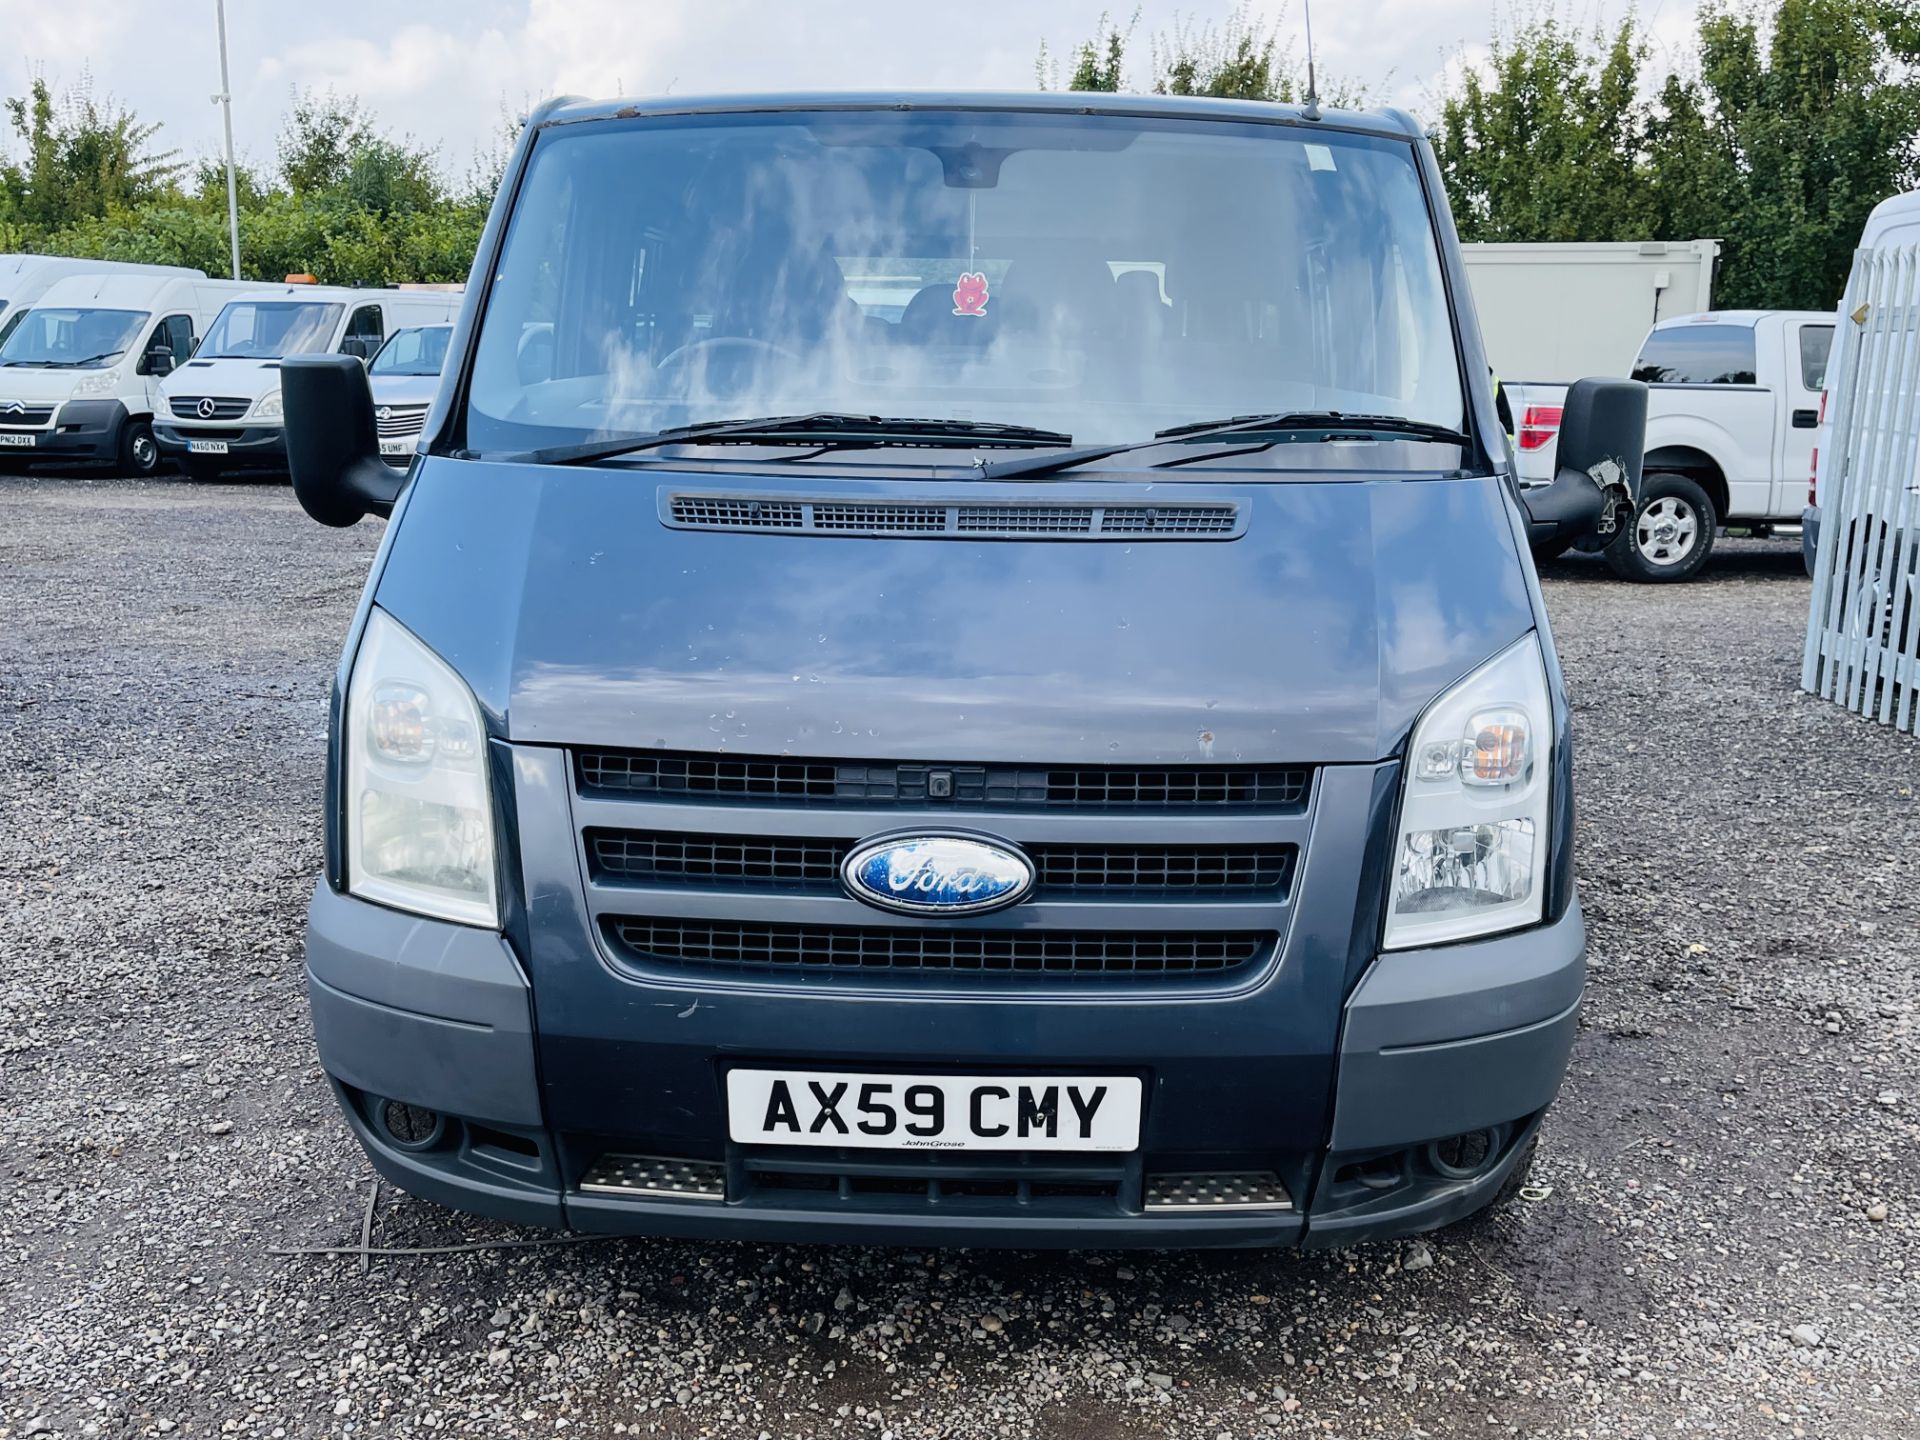 ** ON SALE ** Ford Transit 2.2 TDCI Toureno Trend 2009 '59 Reg' 9 seats -Air Con -Cruise Control - - Image 3 of 21